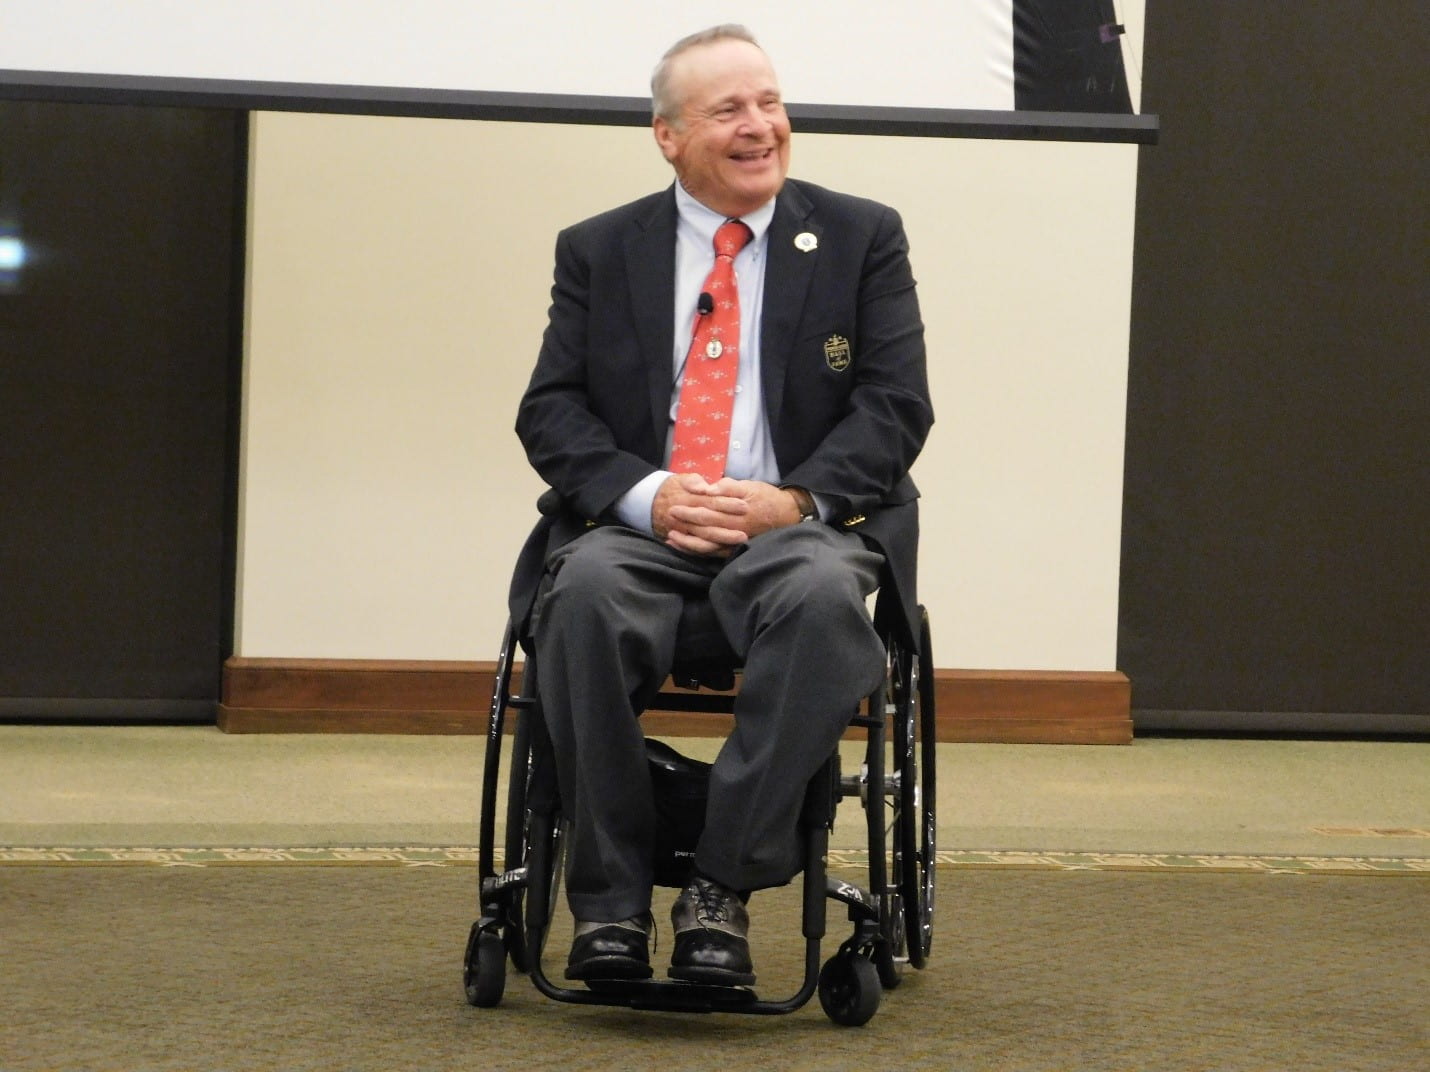 This is a picture from the event of Walters smiling as he speaks to the audience.